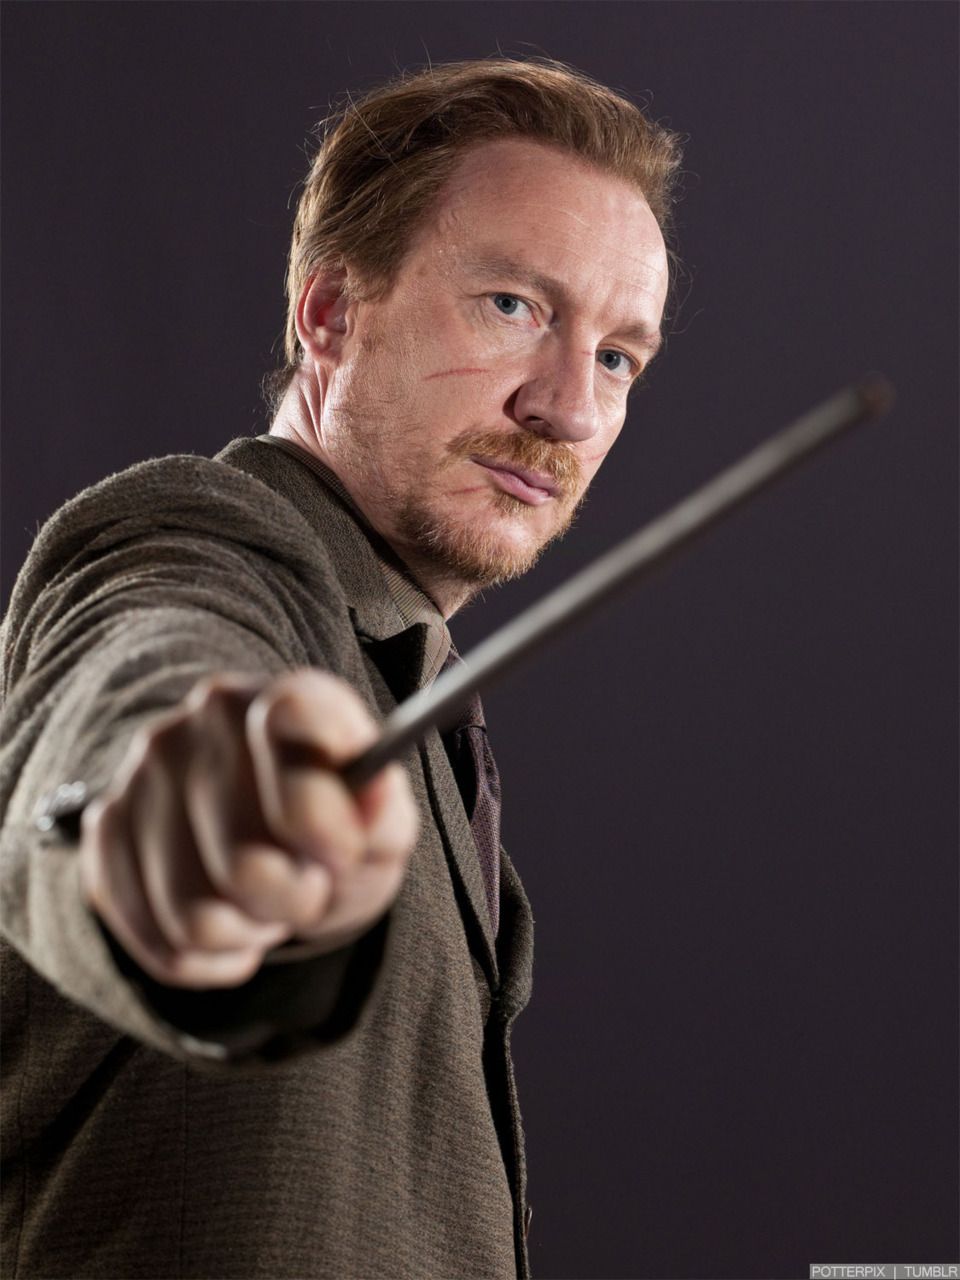 The Remus Lupins